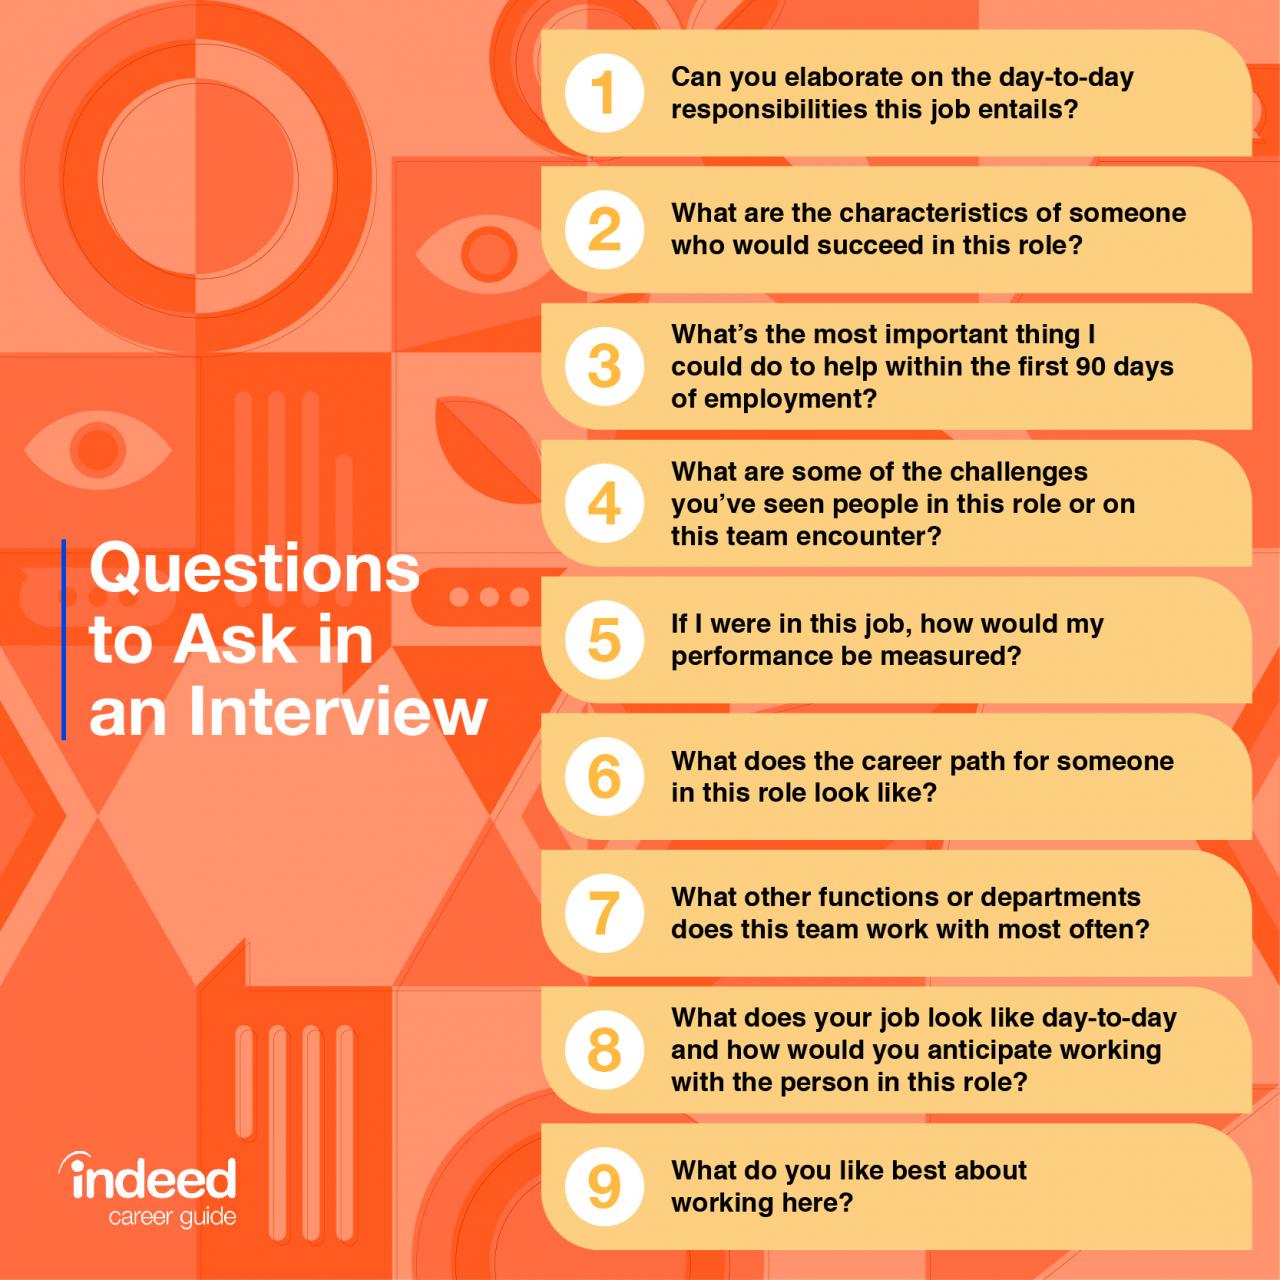 5 most common questions asked in an interview